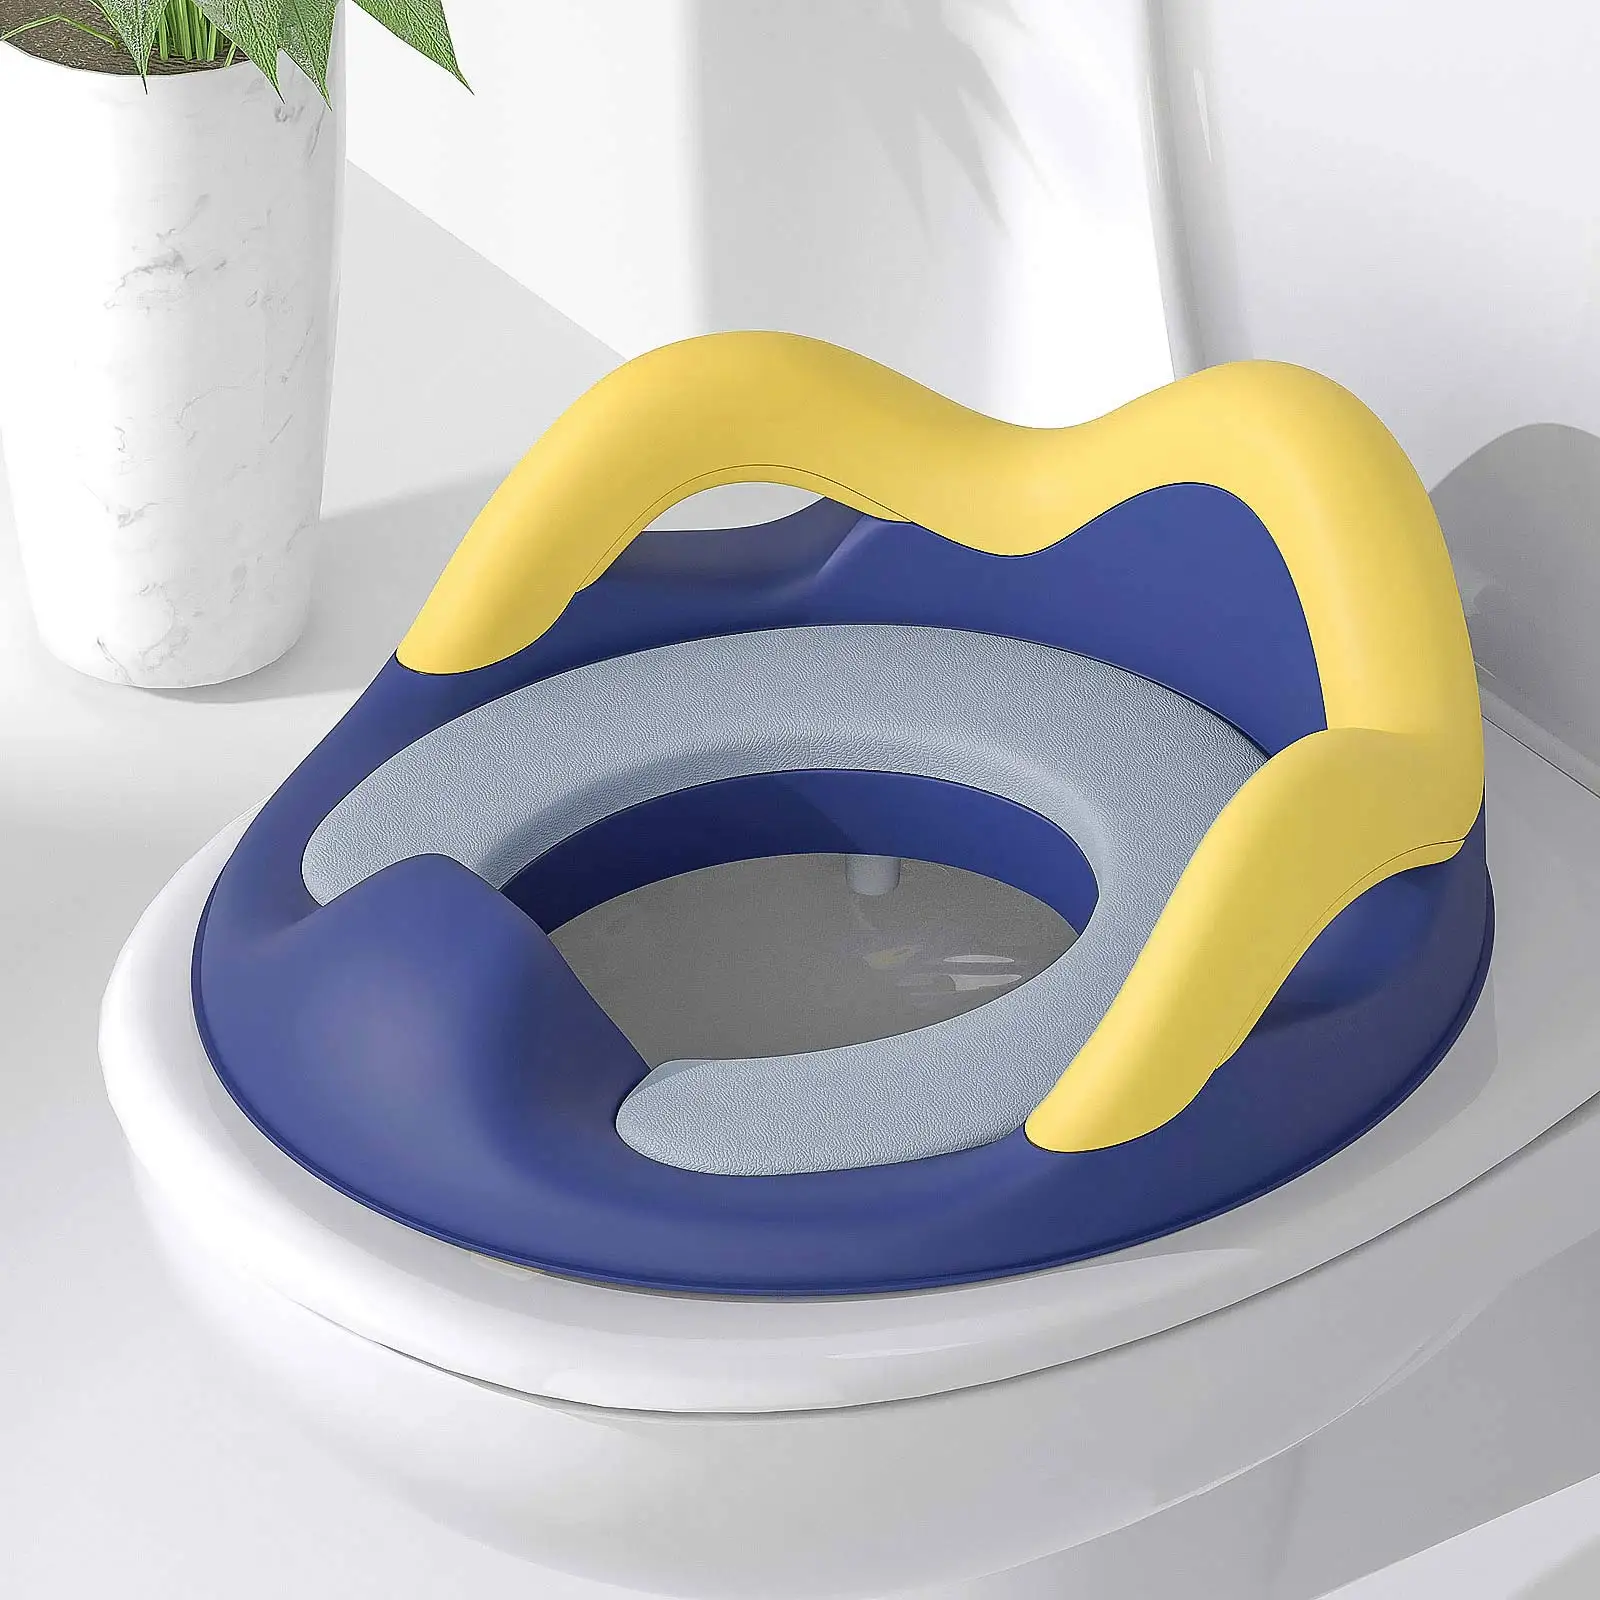 2021 Trending Baby Products Baby Potty Training Seat Kids Potty Trainer Toilet Baby Potty Seat